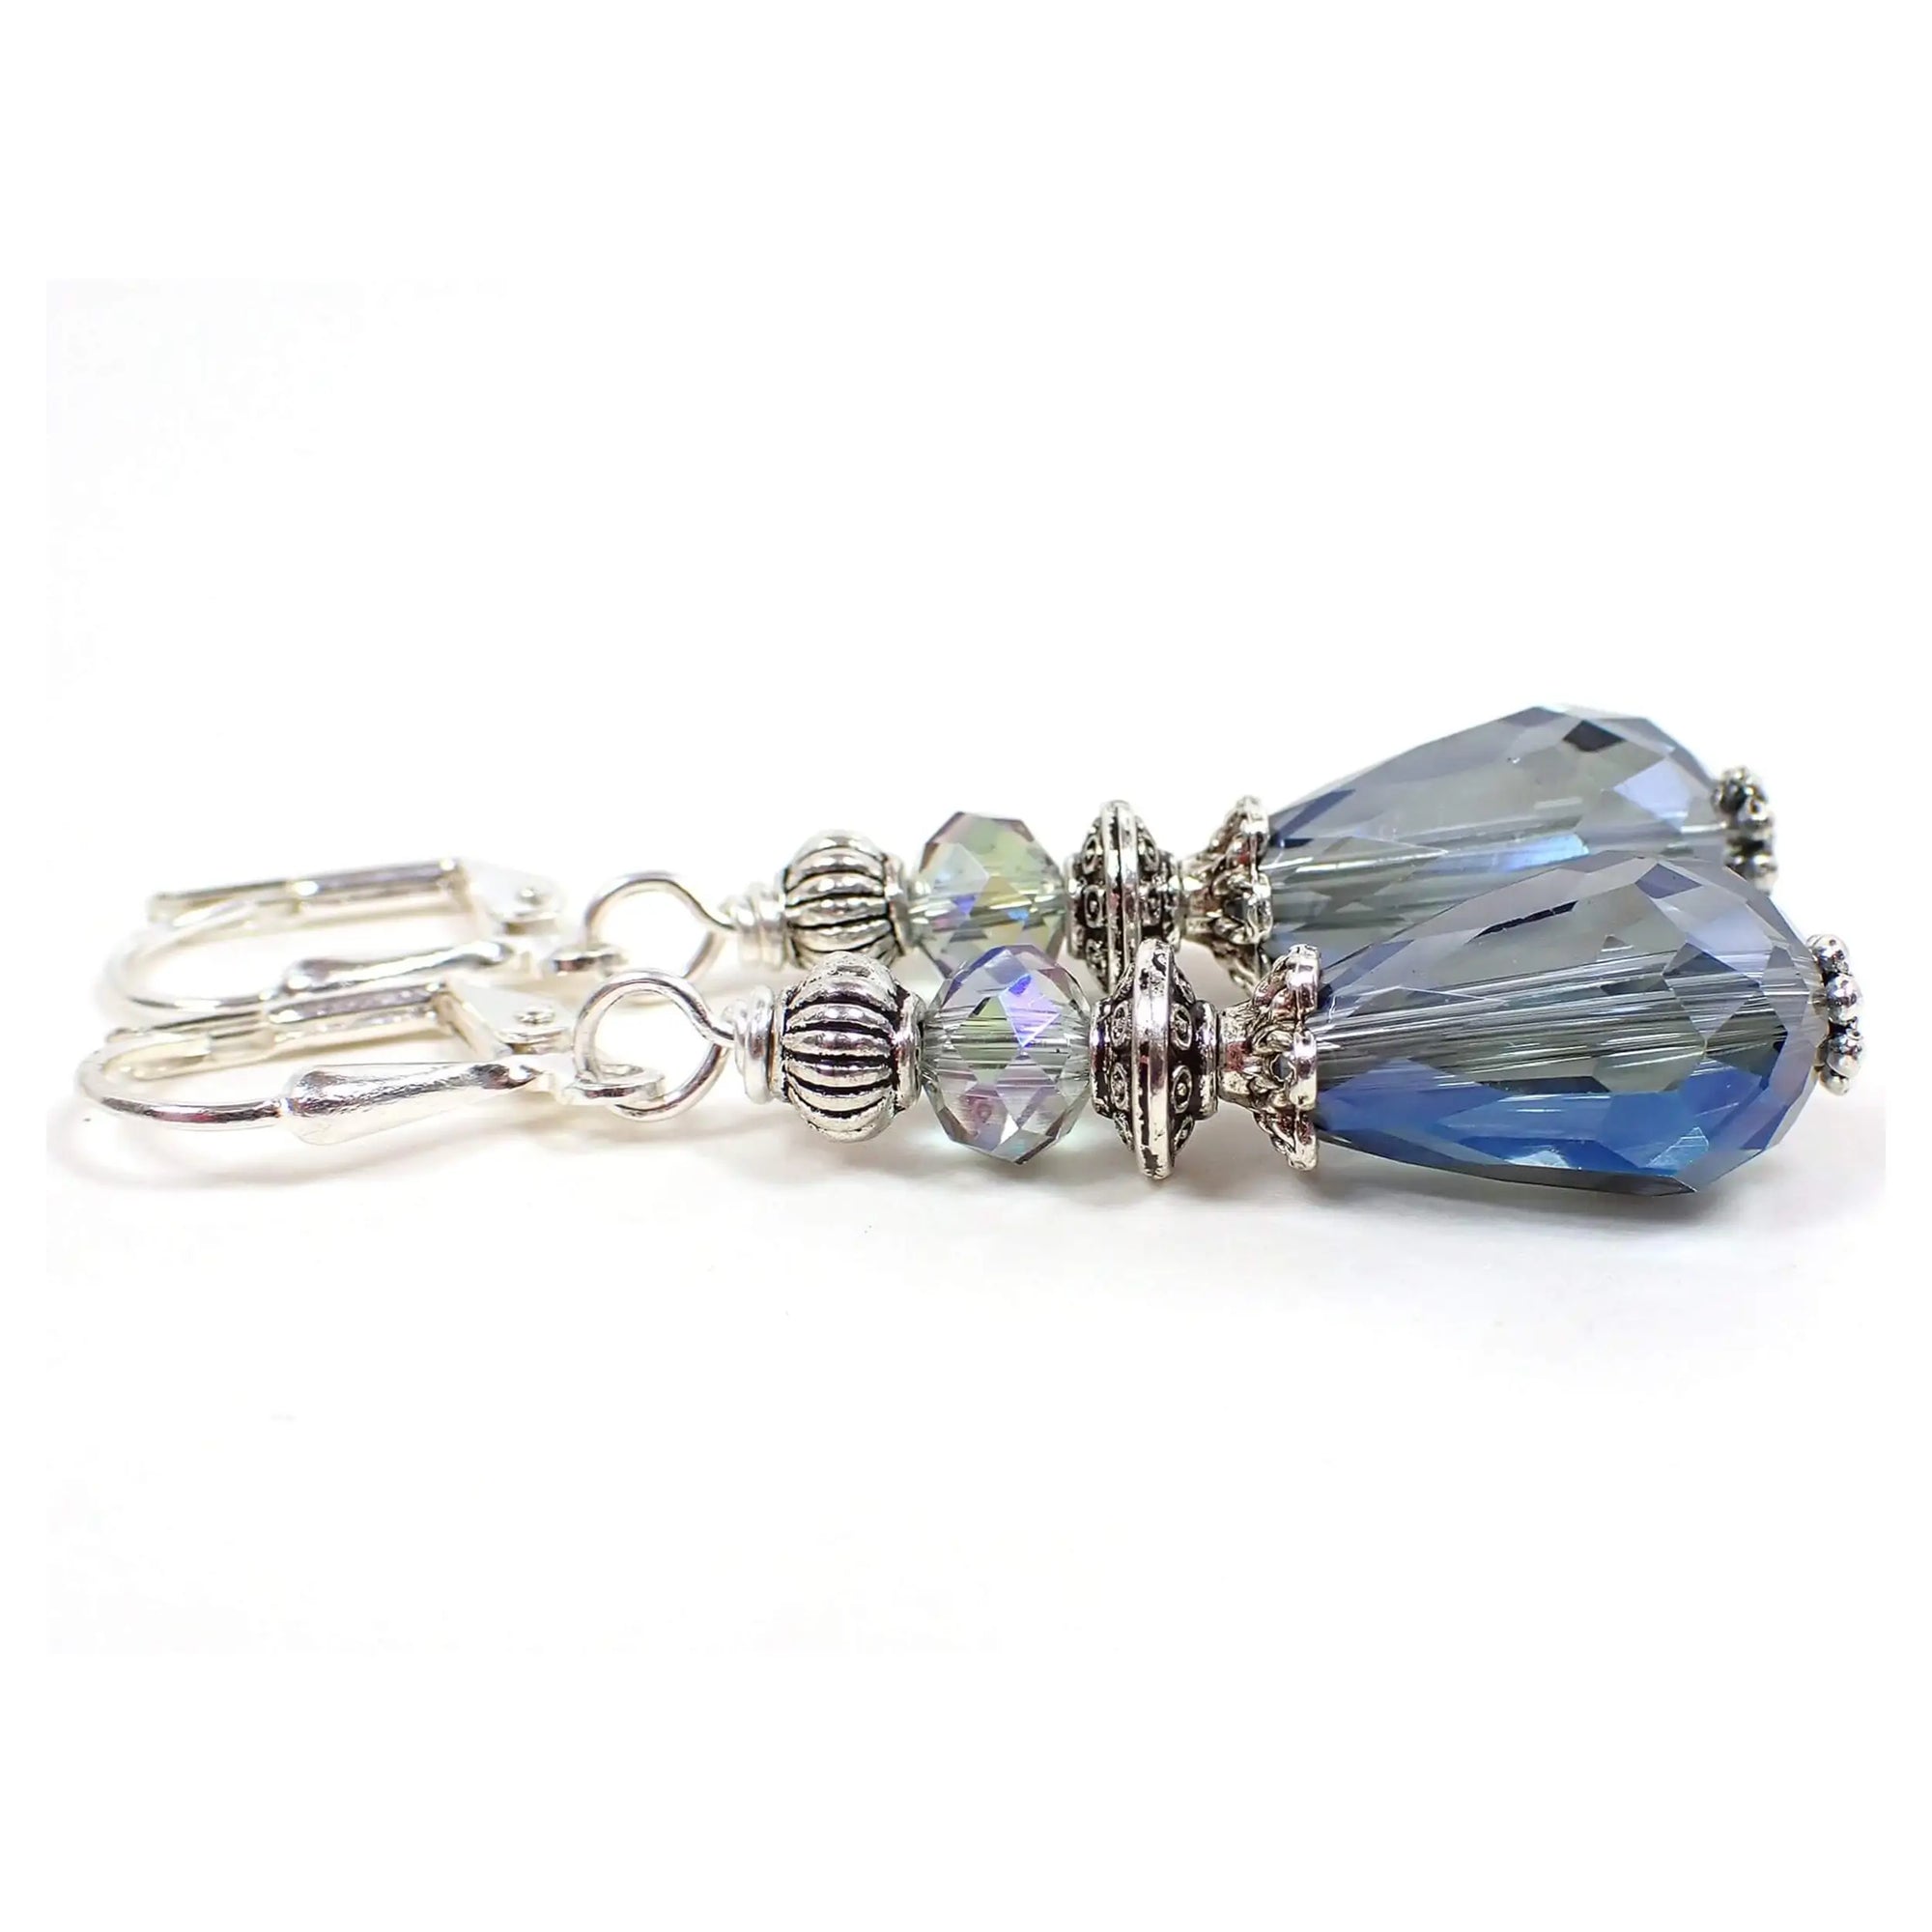 Side view of the handmade teardrop earrings. The metal is silver plated in color. There are AB smoky blue faceted glass crystal rondelle beads at the top and teardrop beads on the bottom.